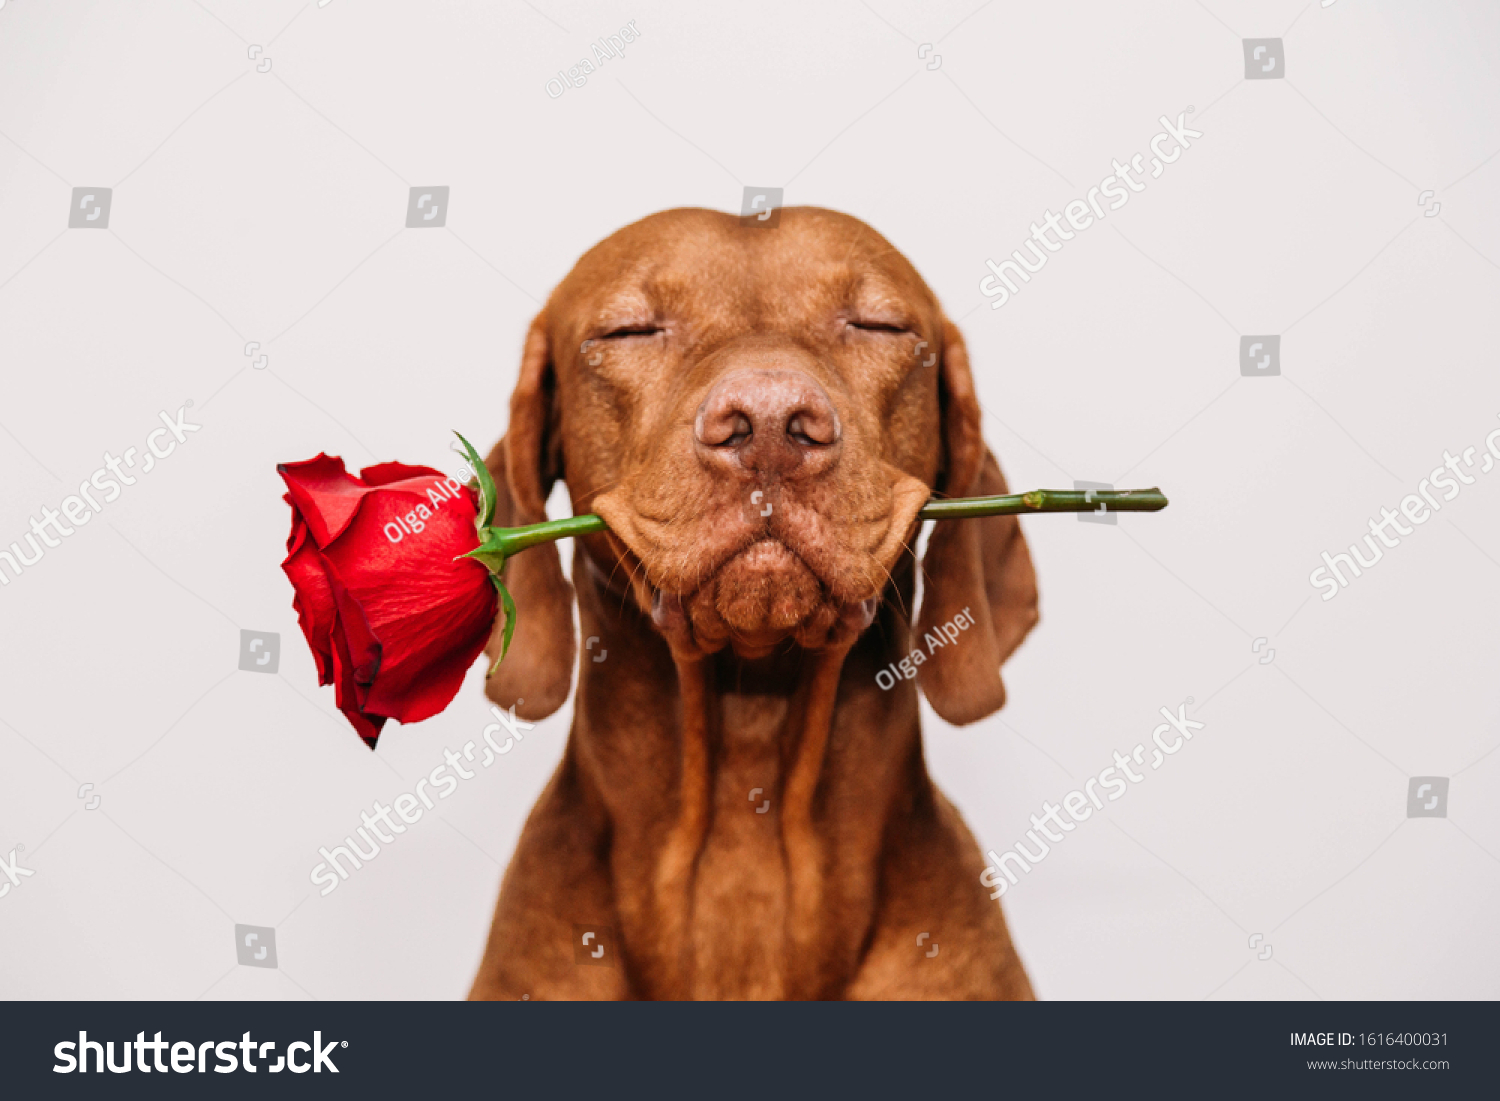  Charming red-haired vizsla dog with eyes closed holds a red rose in his mouth as a gift for Valentine's Day on a white background. #1616400031